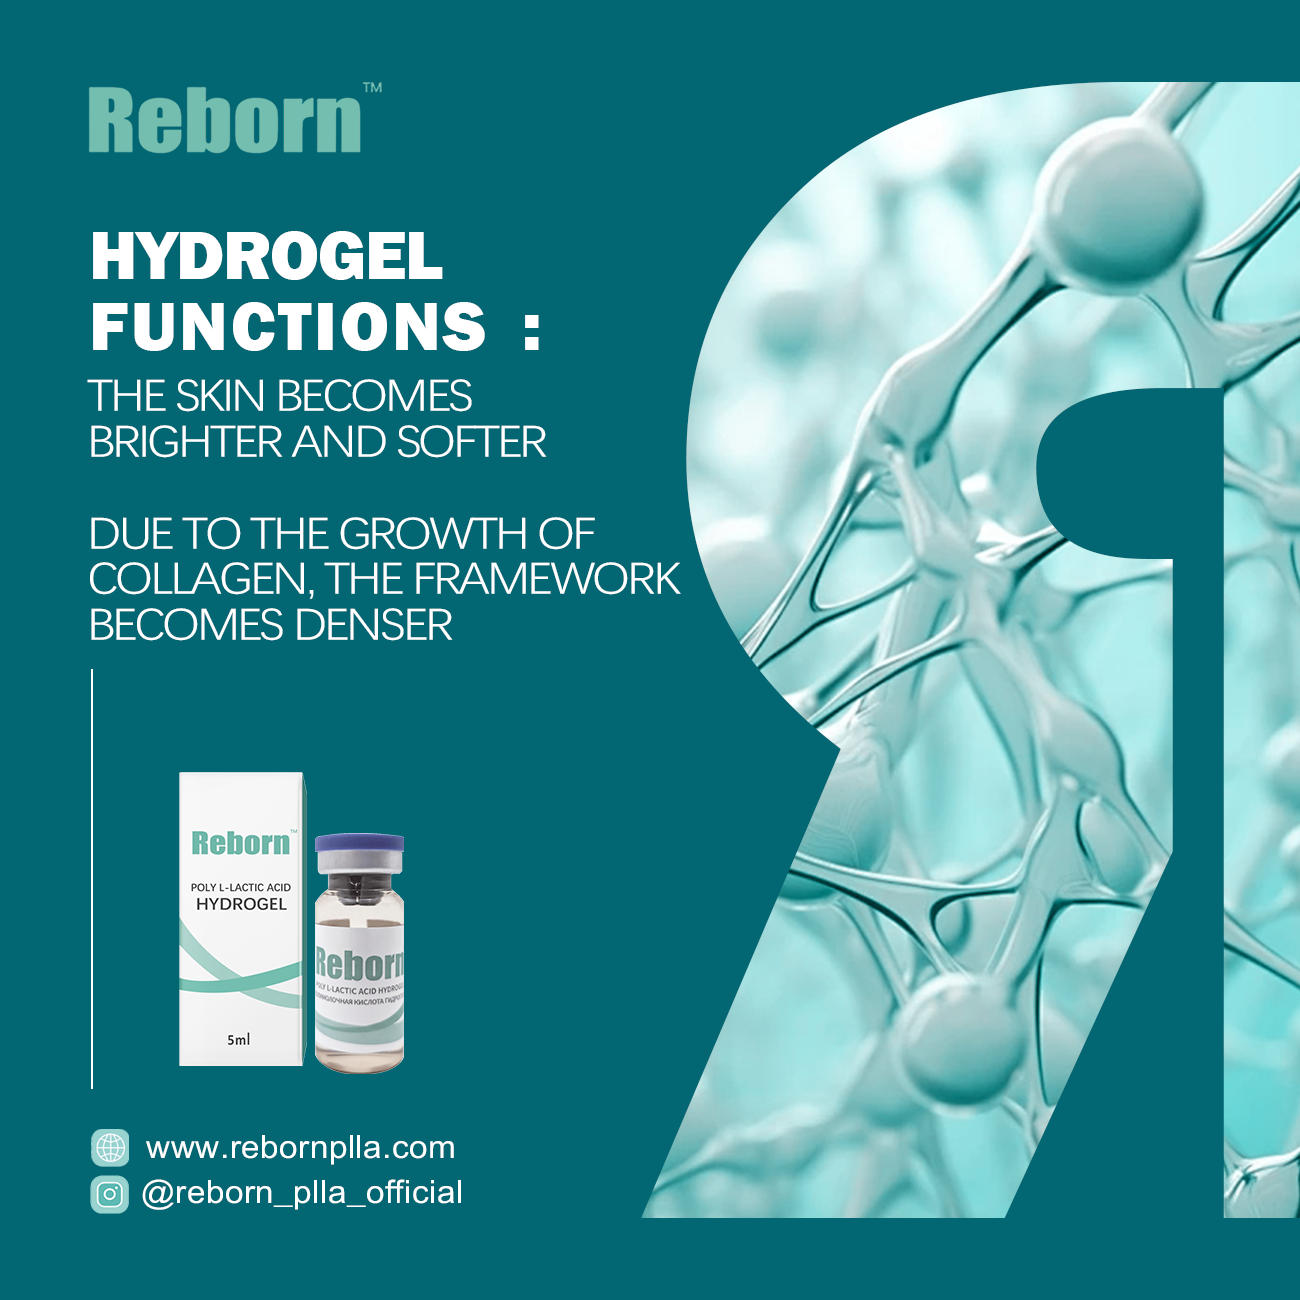 The skin becomes brighter and softer with Reborn plla hydrogel